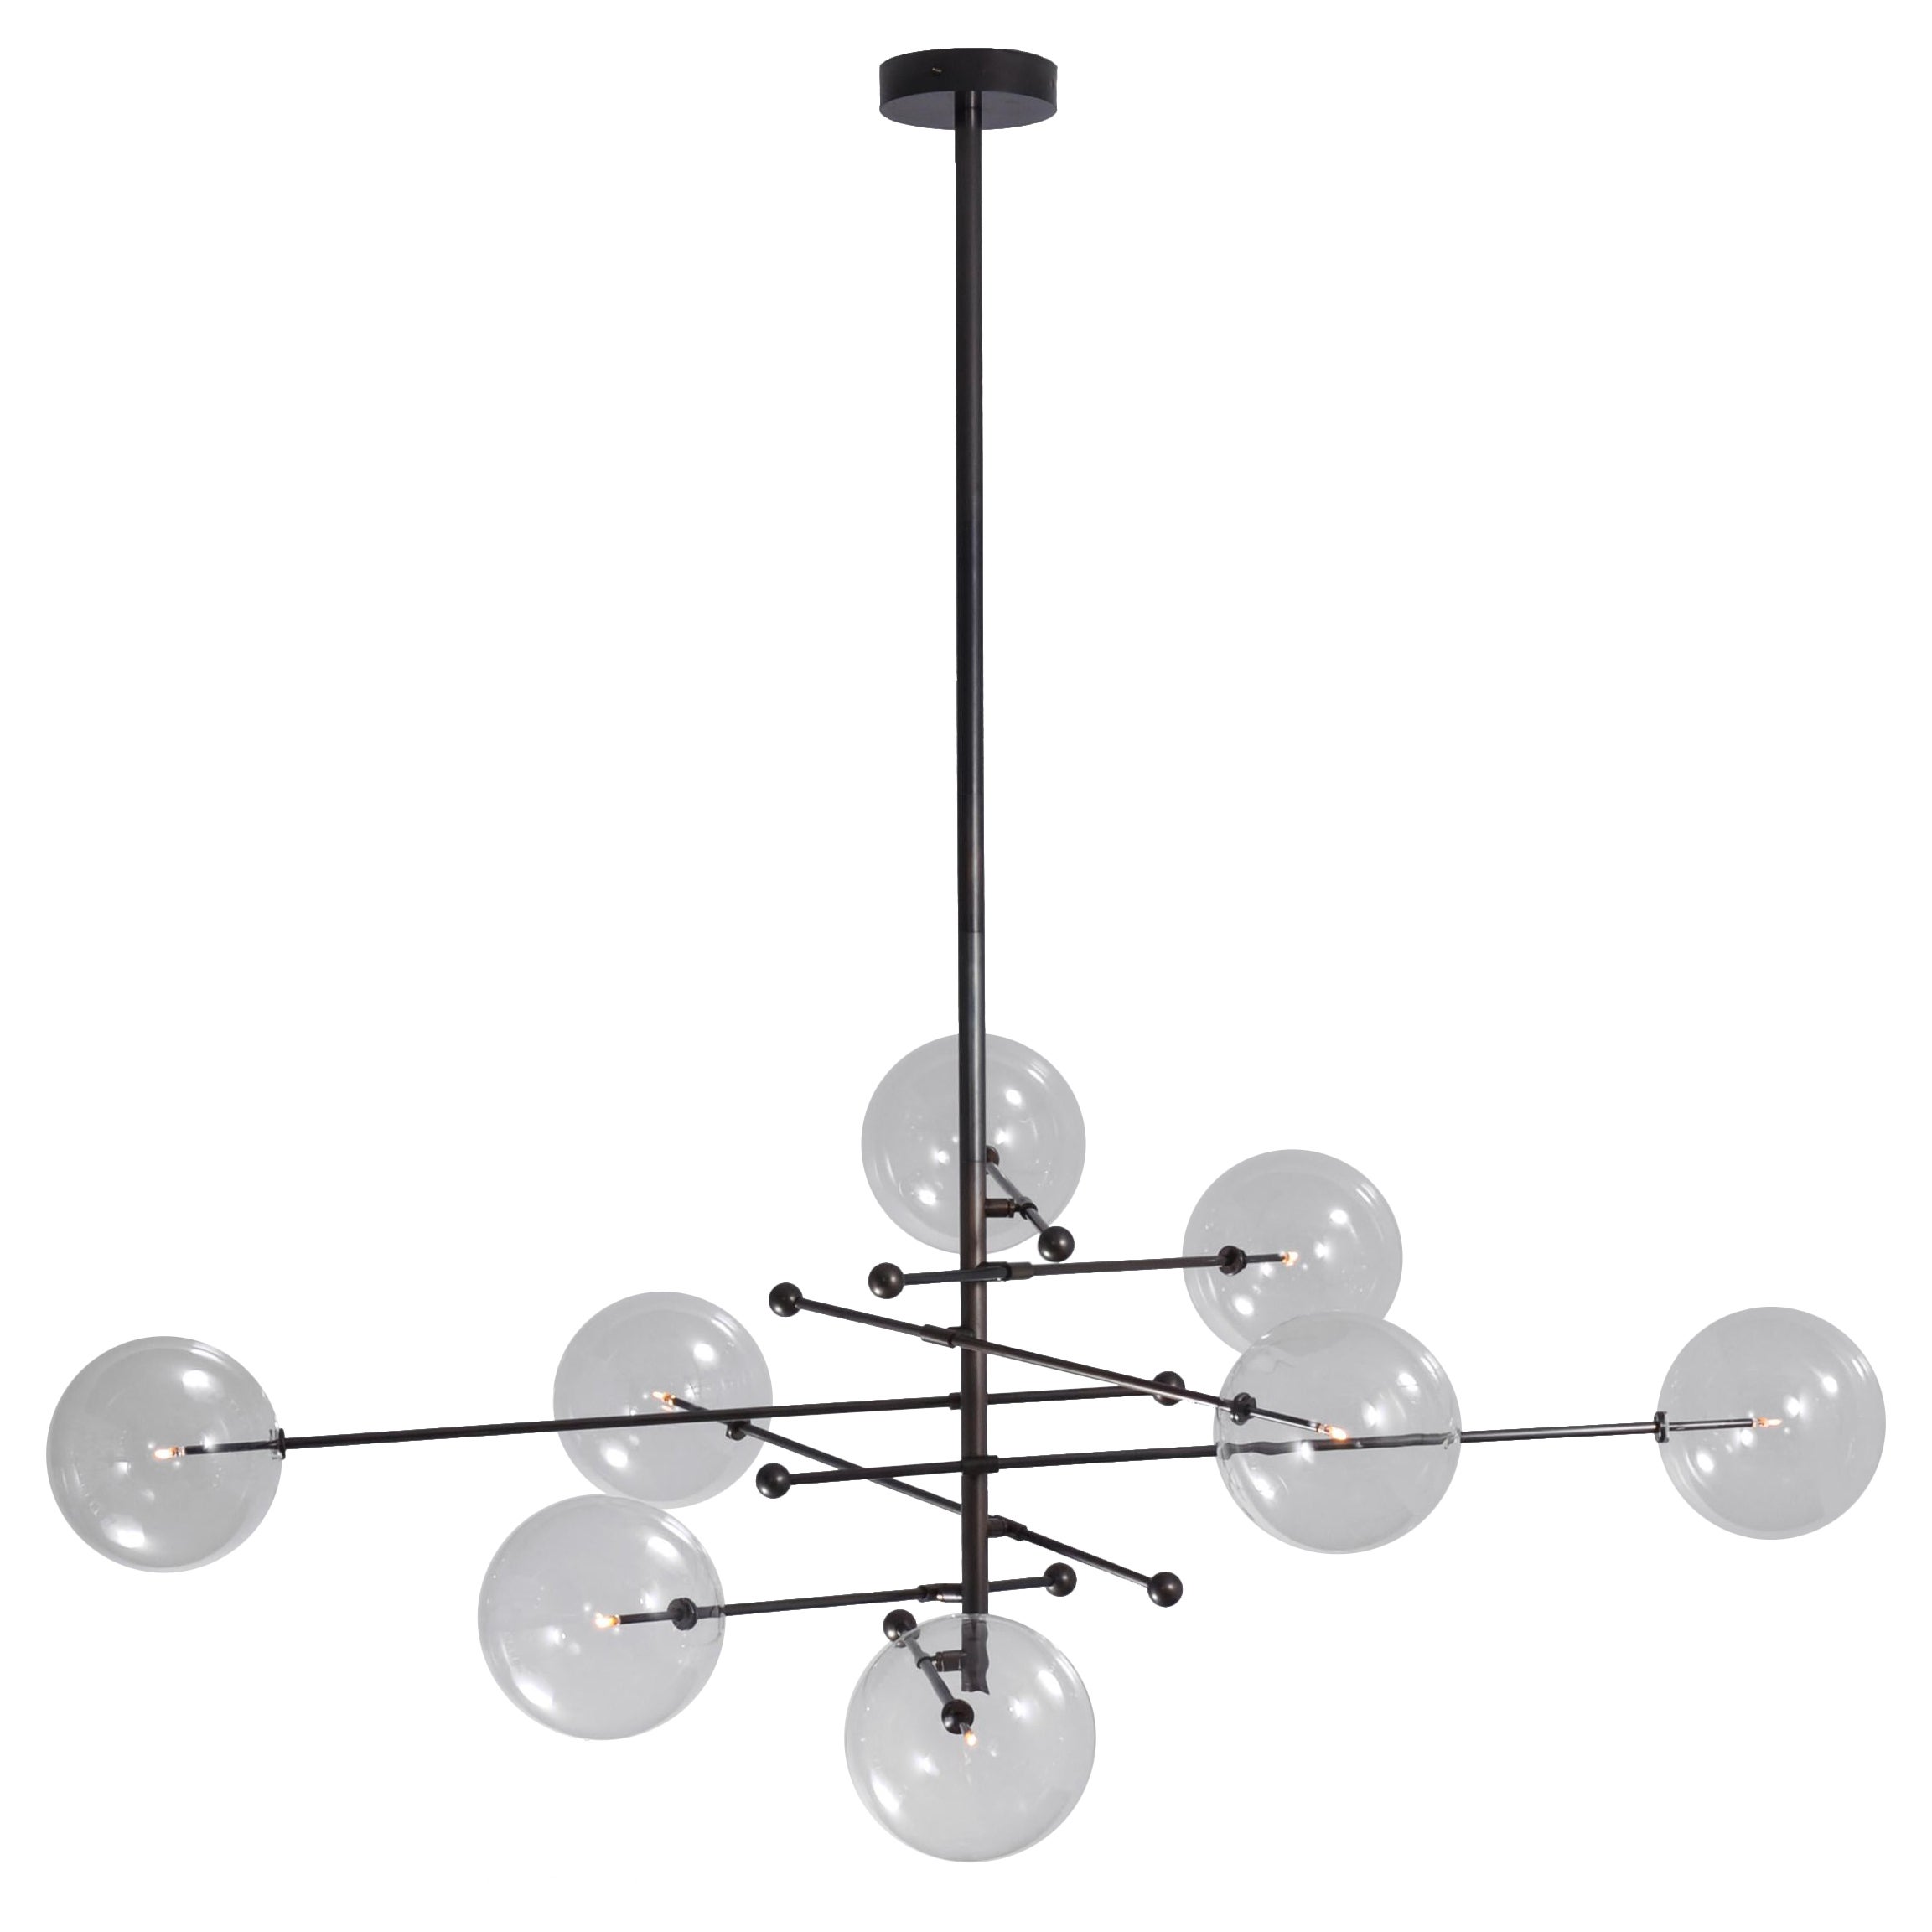 RD15 8 Arms Black Gunmetal Chandelier by Schwung For Sale